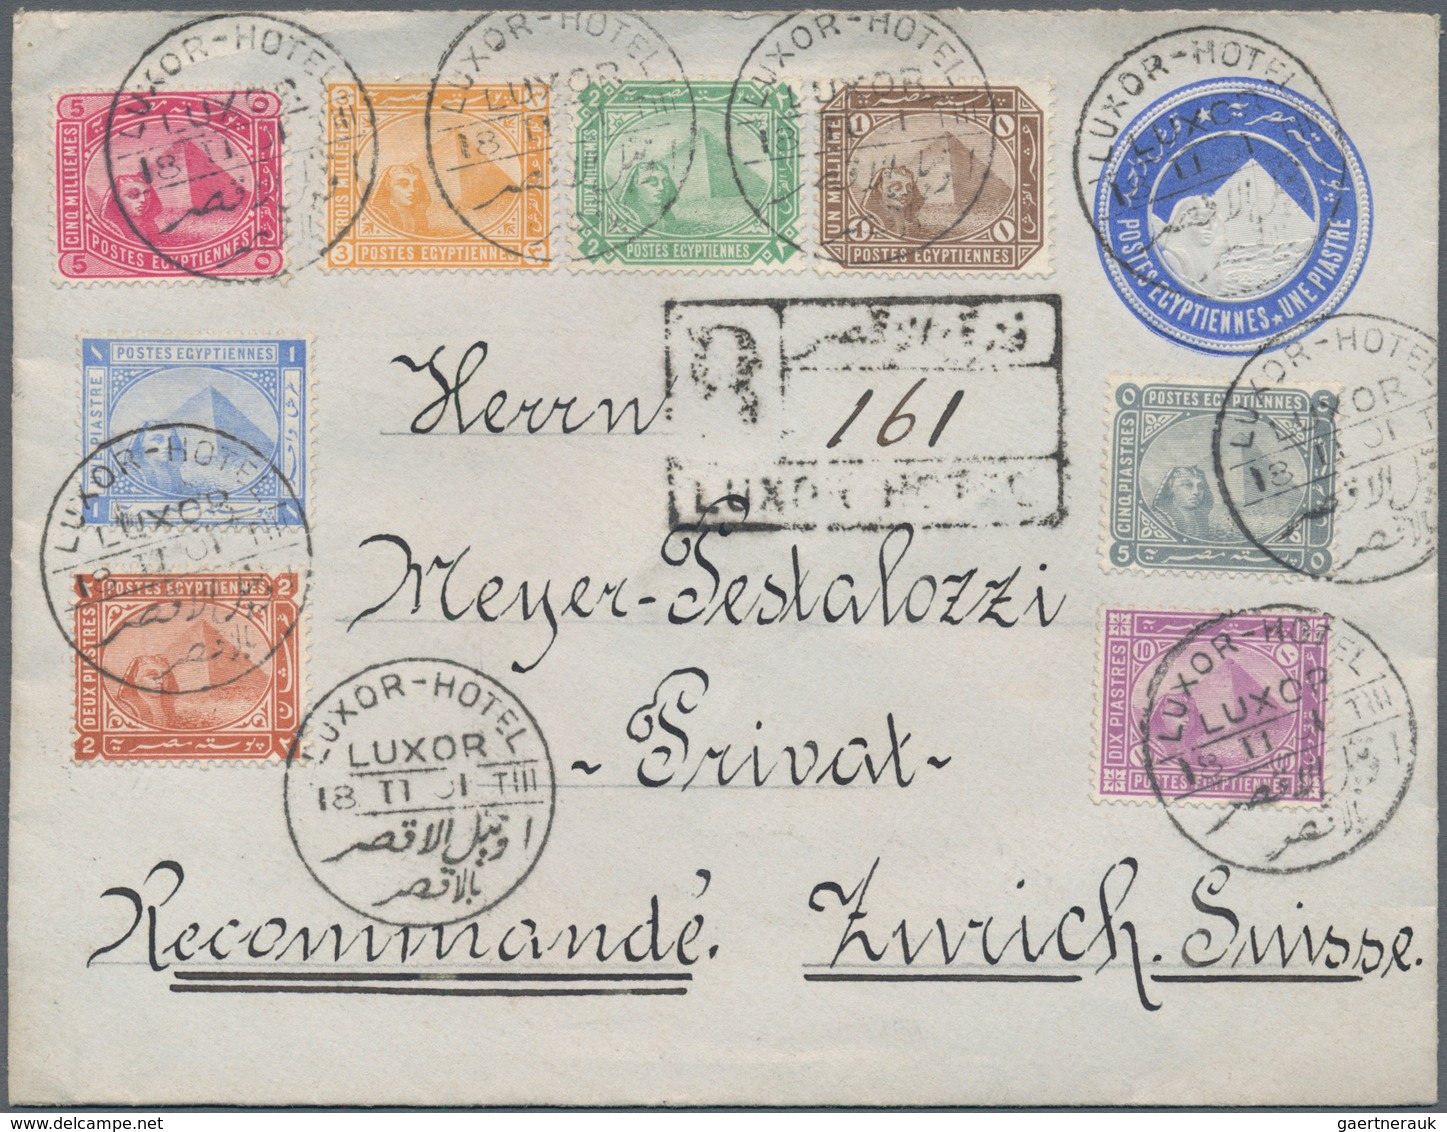 00469 Ägypten: 1881-1909, 8 Different Stamps Of The De La Rue Issues Including The 5 Piastres Pale Grey An - 1915-1921 British Protectorate